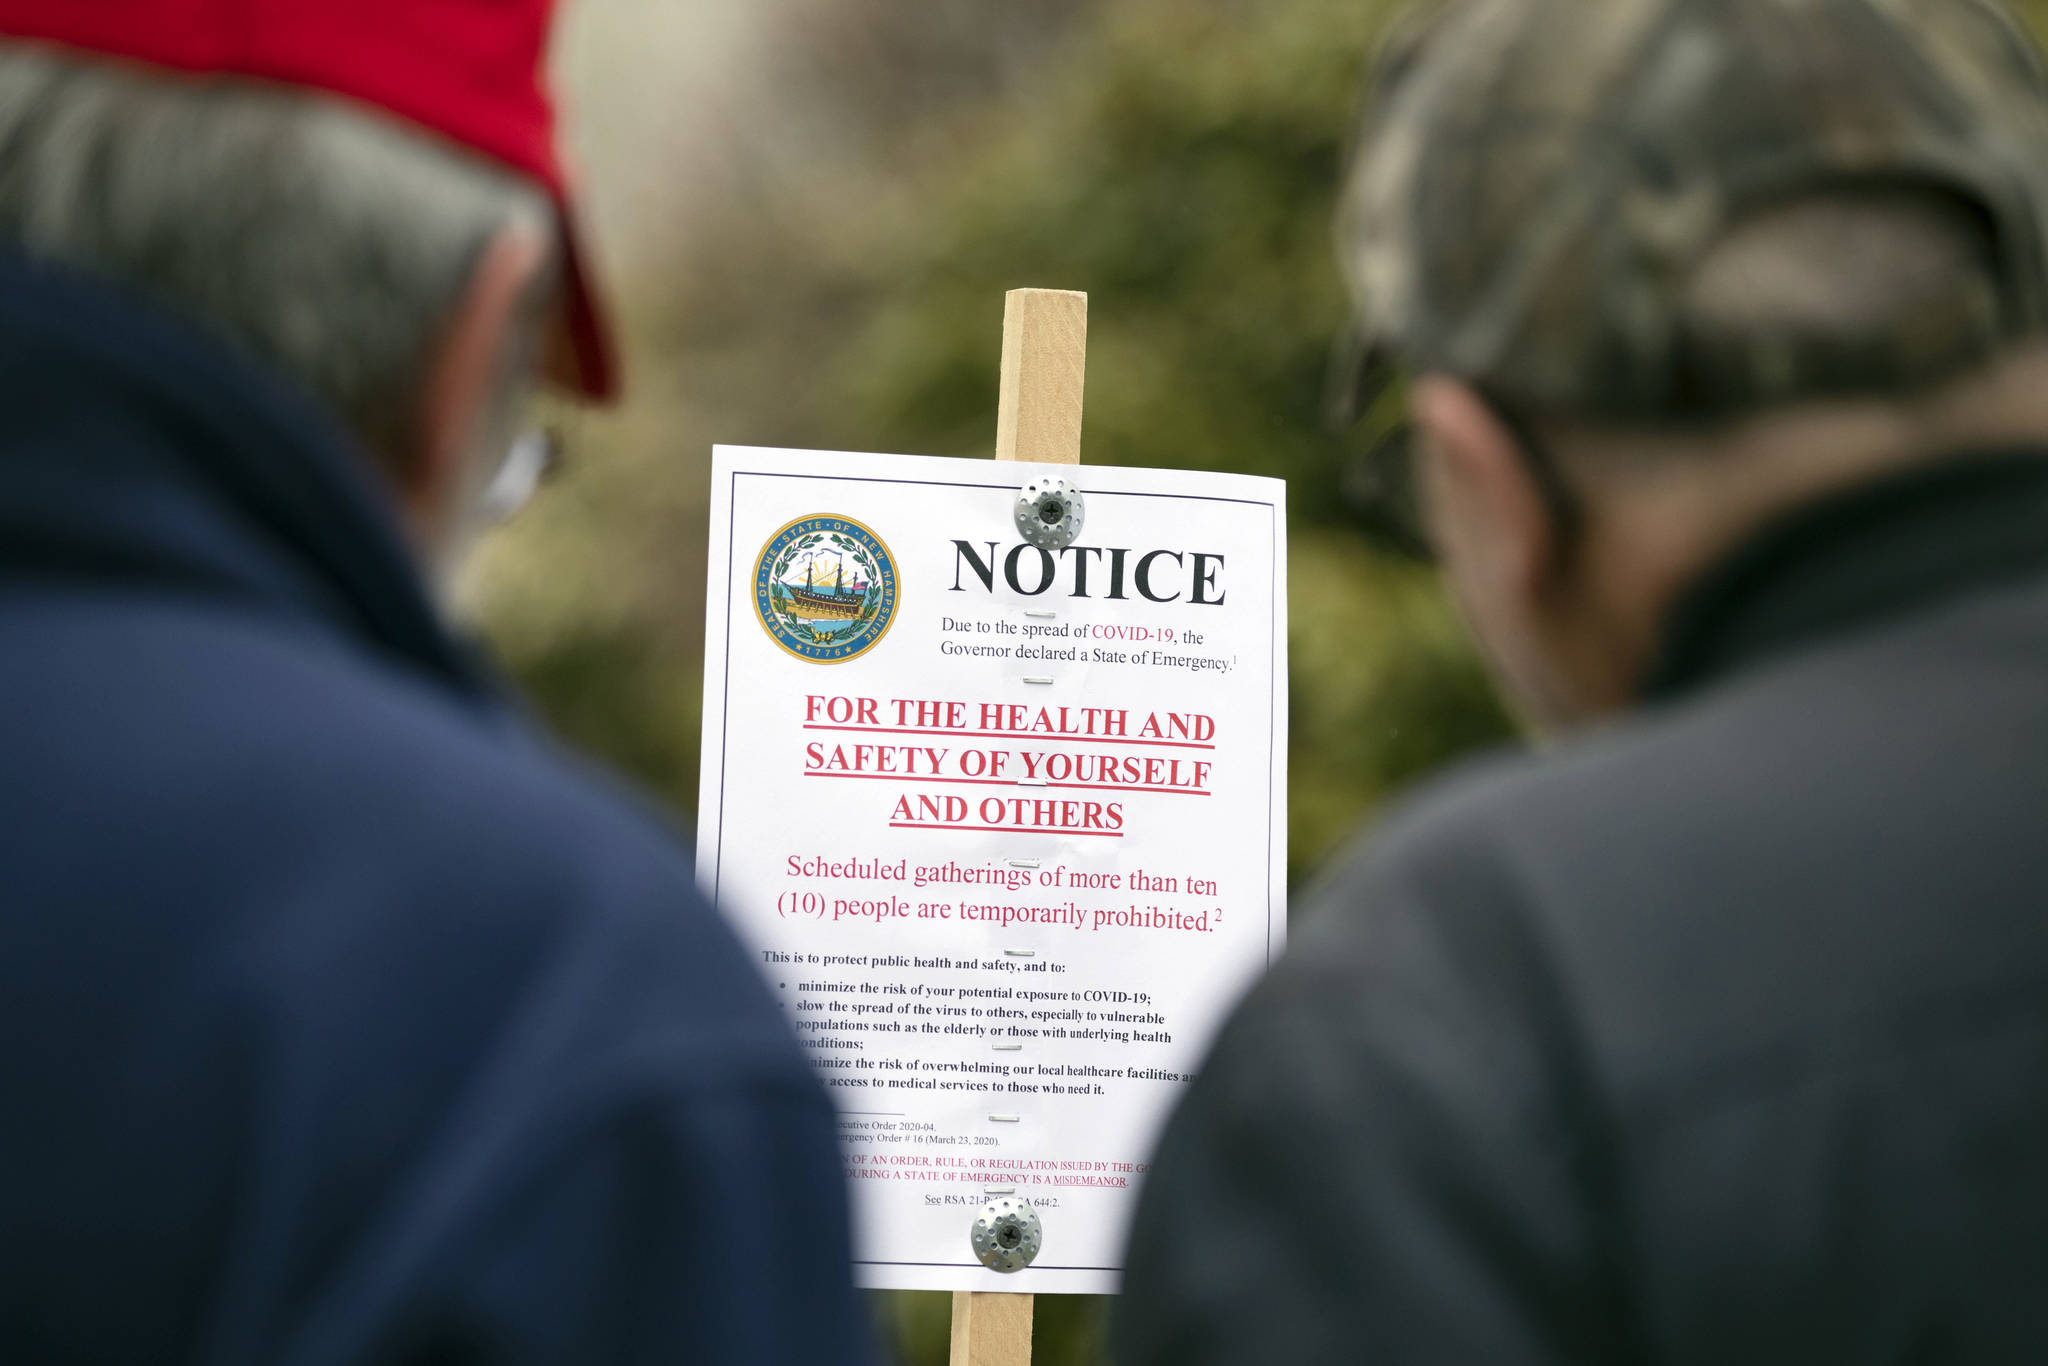 Tom Ploszaj, left, and Tony Stelik read a sign prohibiting gatherings of 10 or more people as they arrive at the State House for a scheduled protest against the state lockdown due to COVID-19, Saturday, April 18, 2020, in Concord, N.H. (AP Photo | Michael Dwyer)